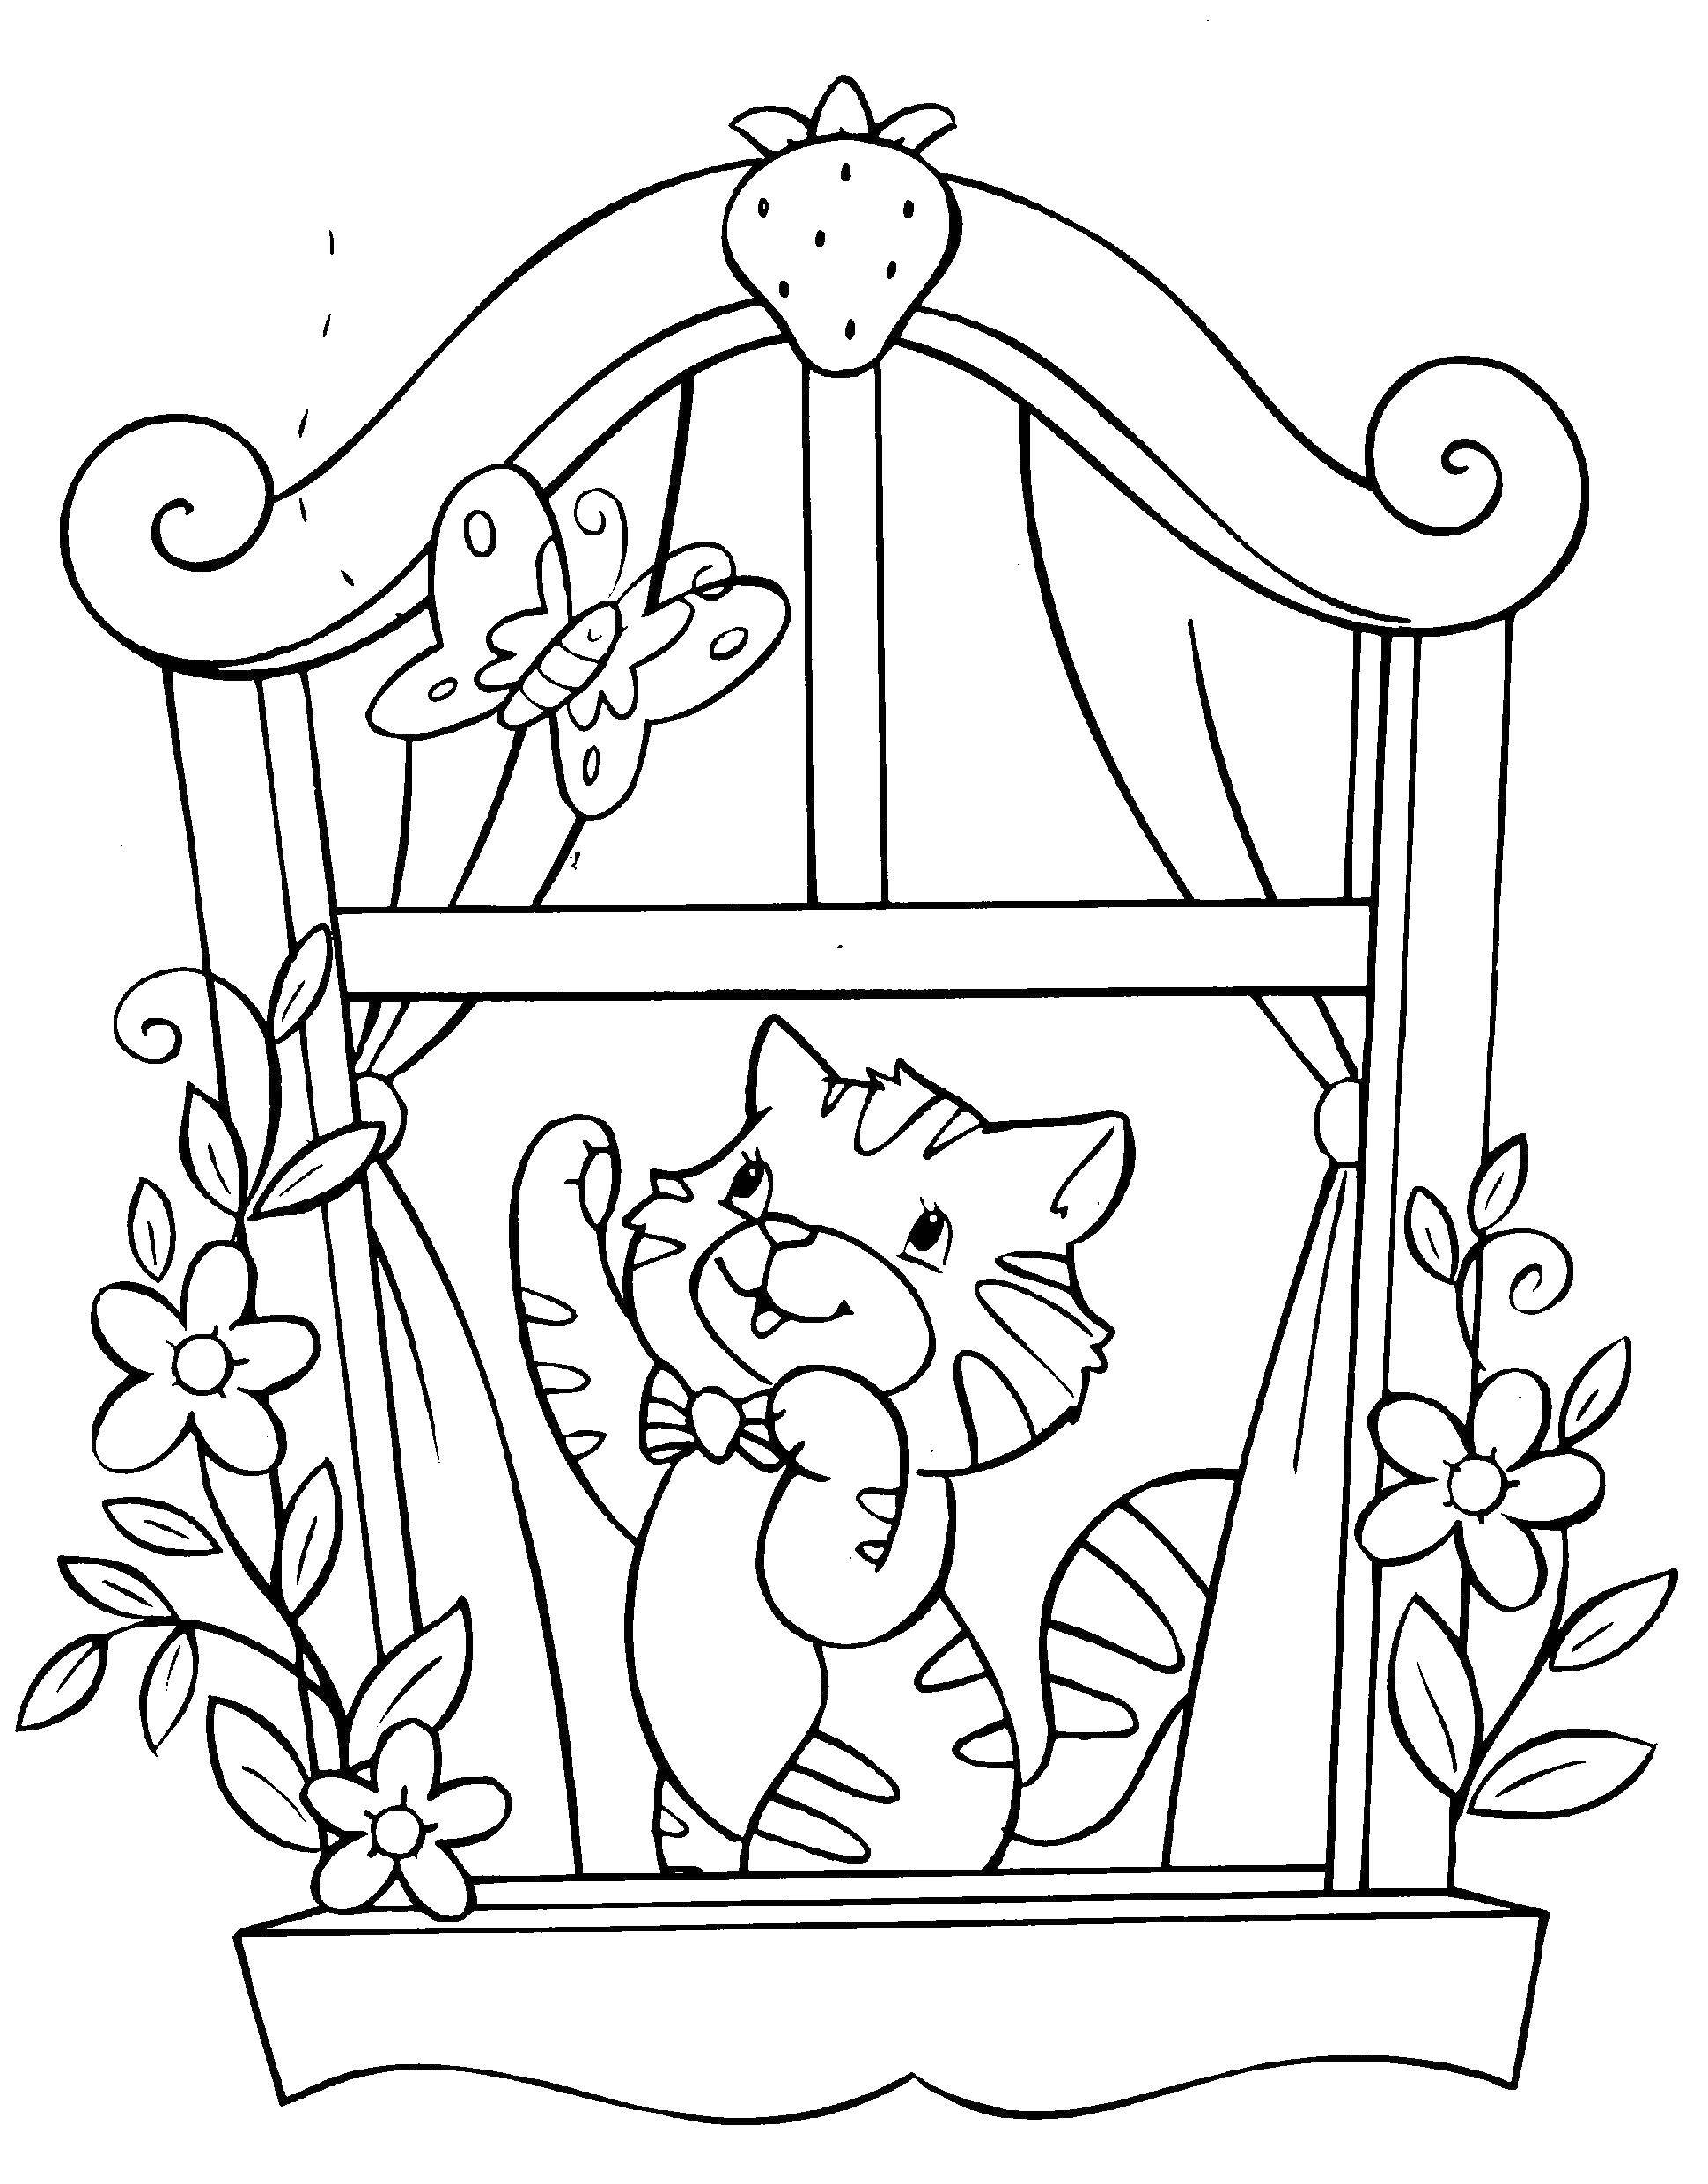 Coloring Cat in the window. Category Cats and kittens. Tags:  animals, kitten, cat.